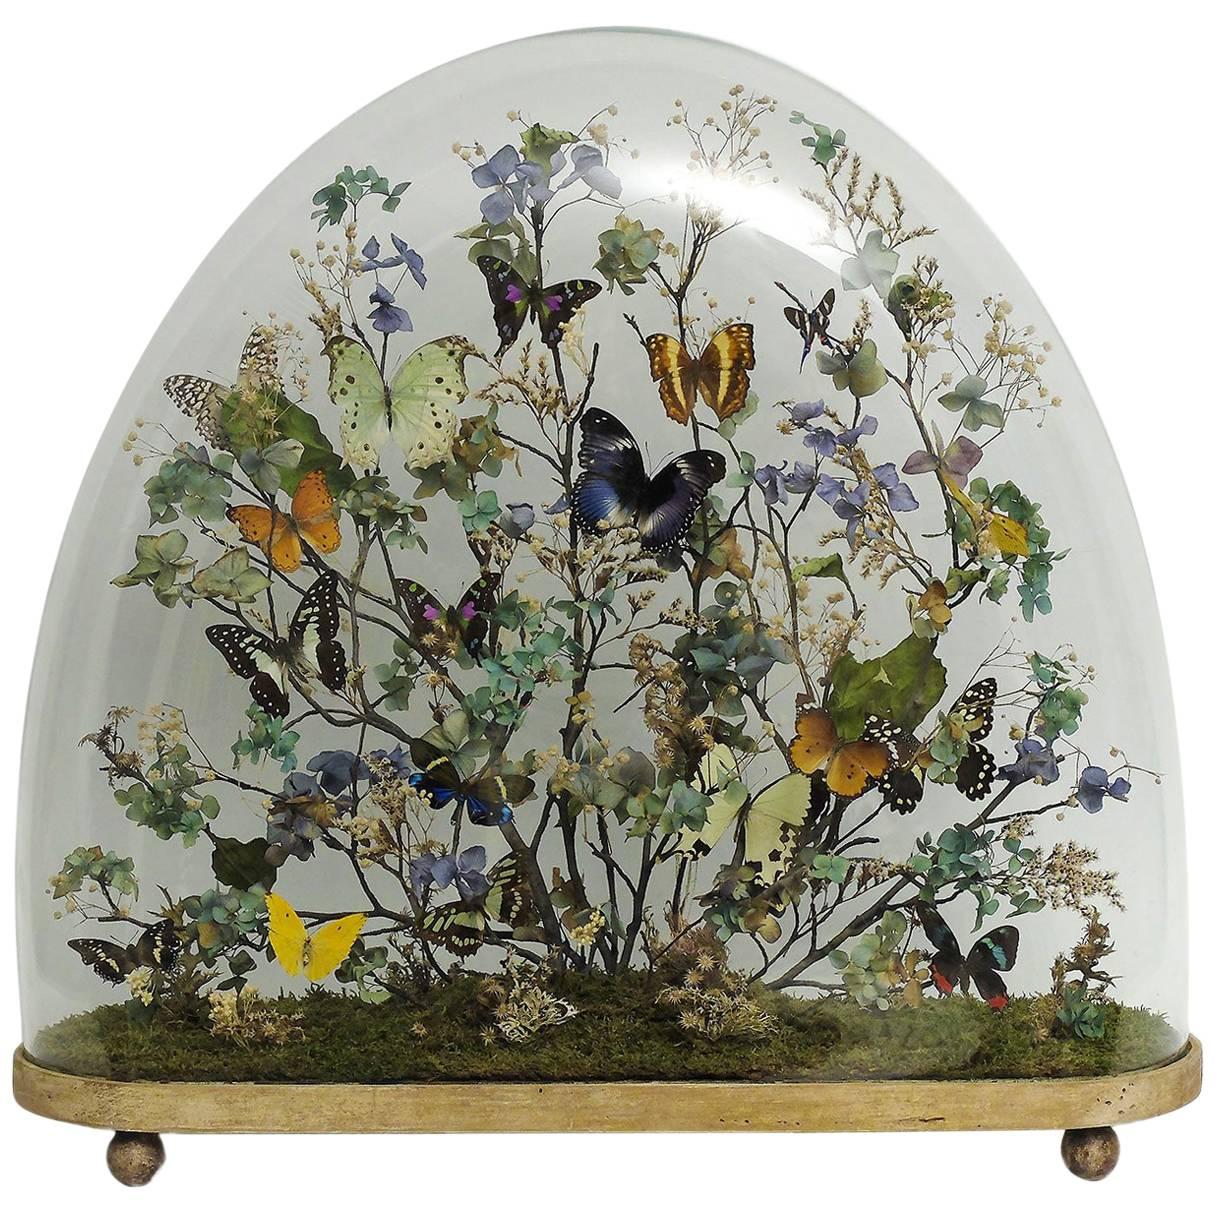 Splendid and Unique Wunderkammer Diorama with Butterflies and Flowers